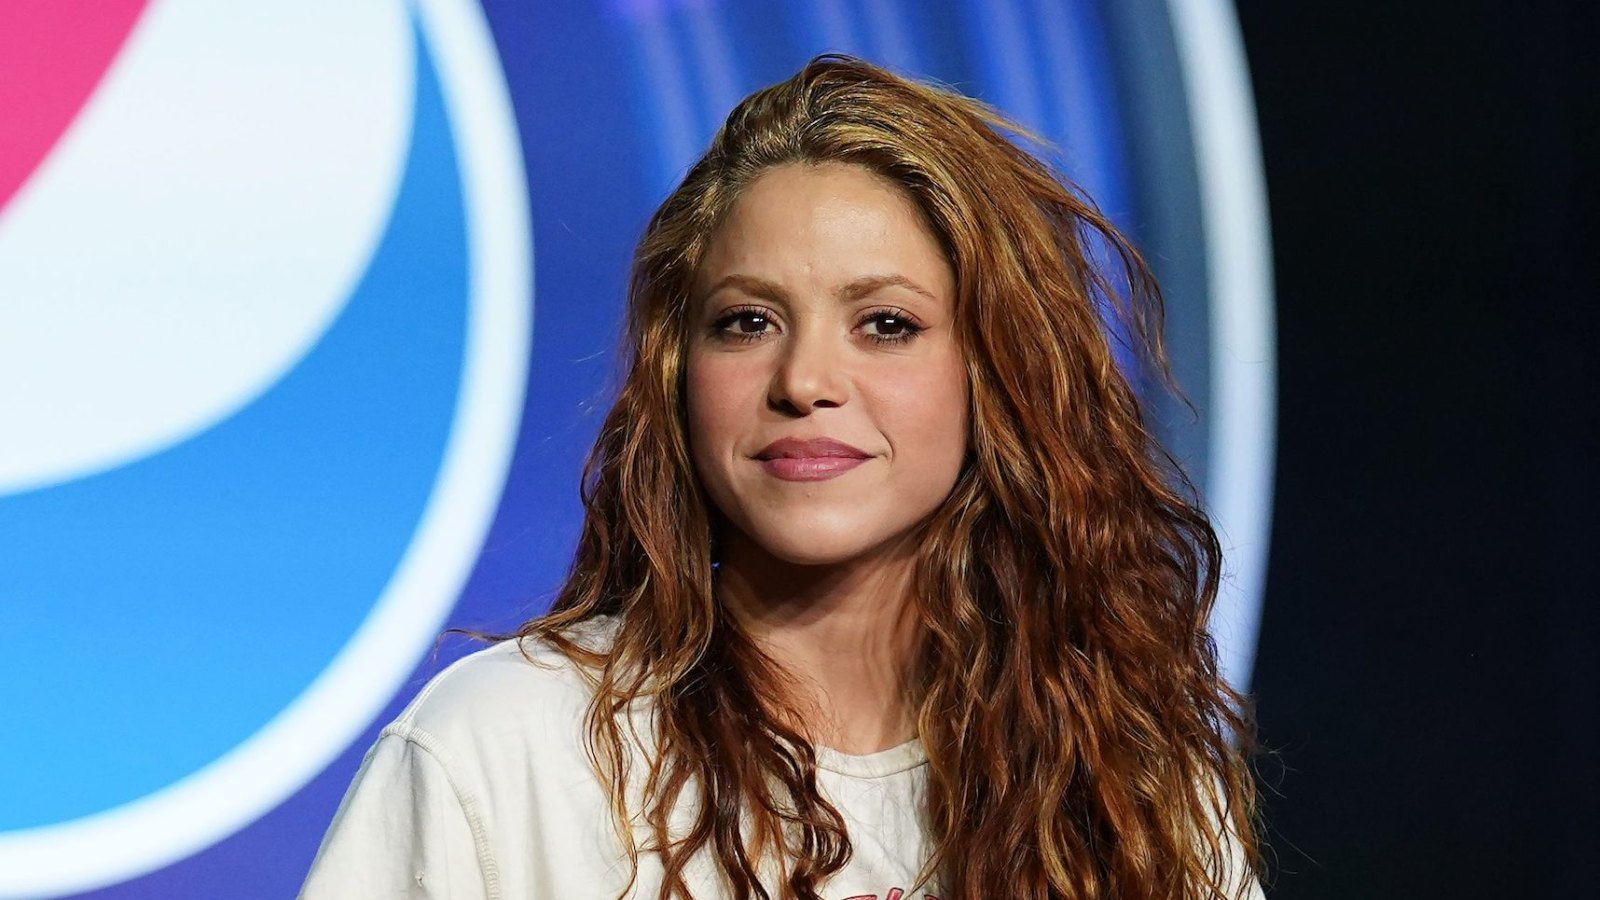 Shakira Faces Second Tax Fraud Case in Spain